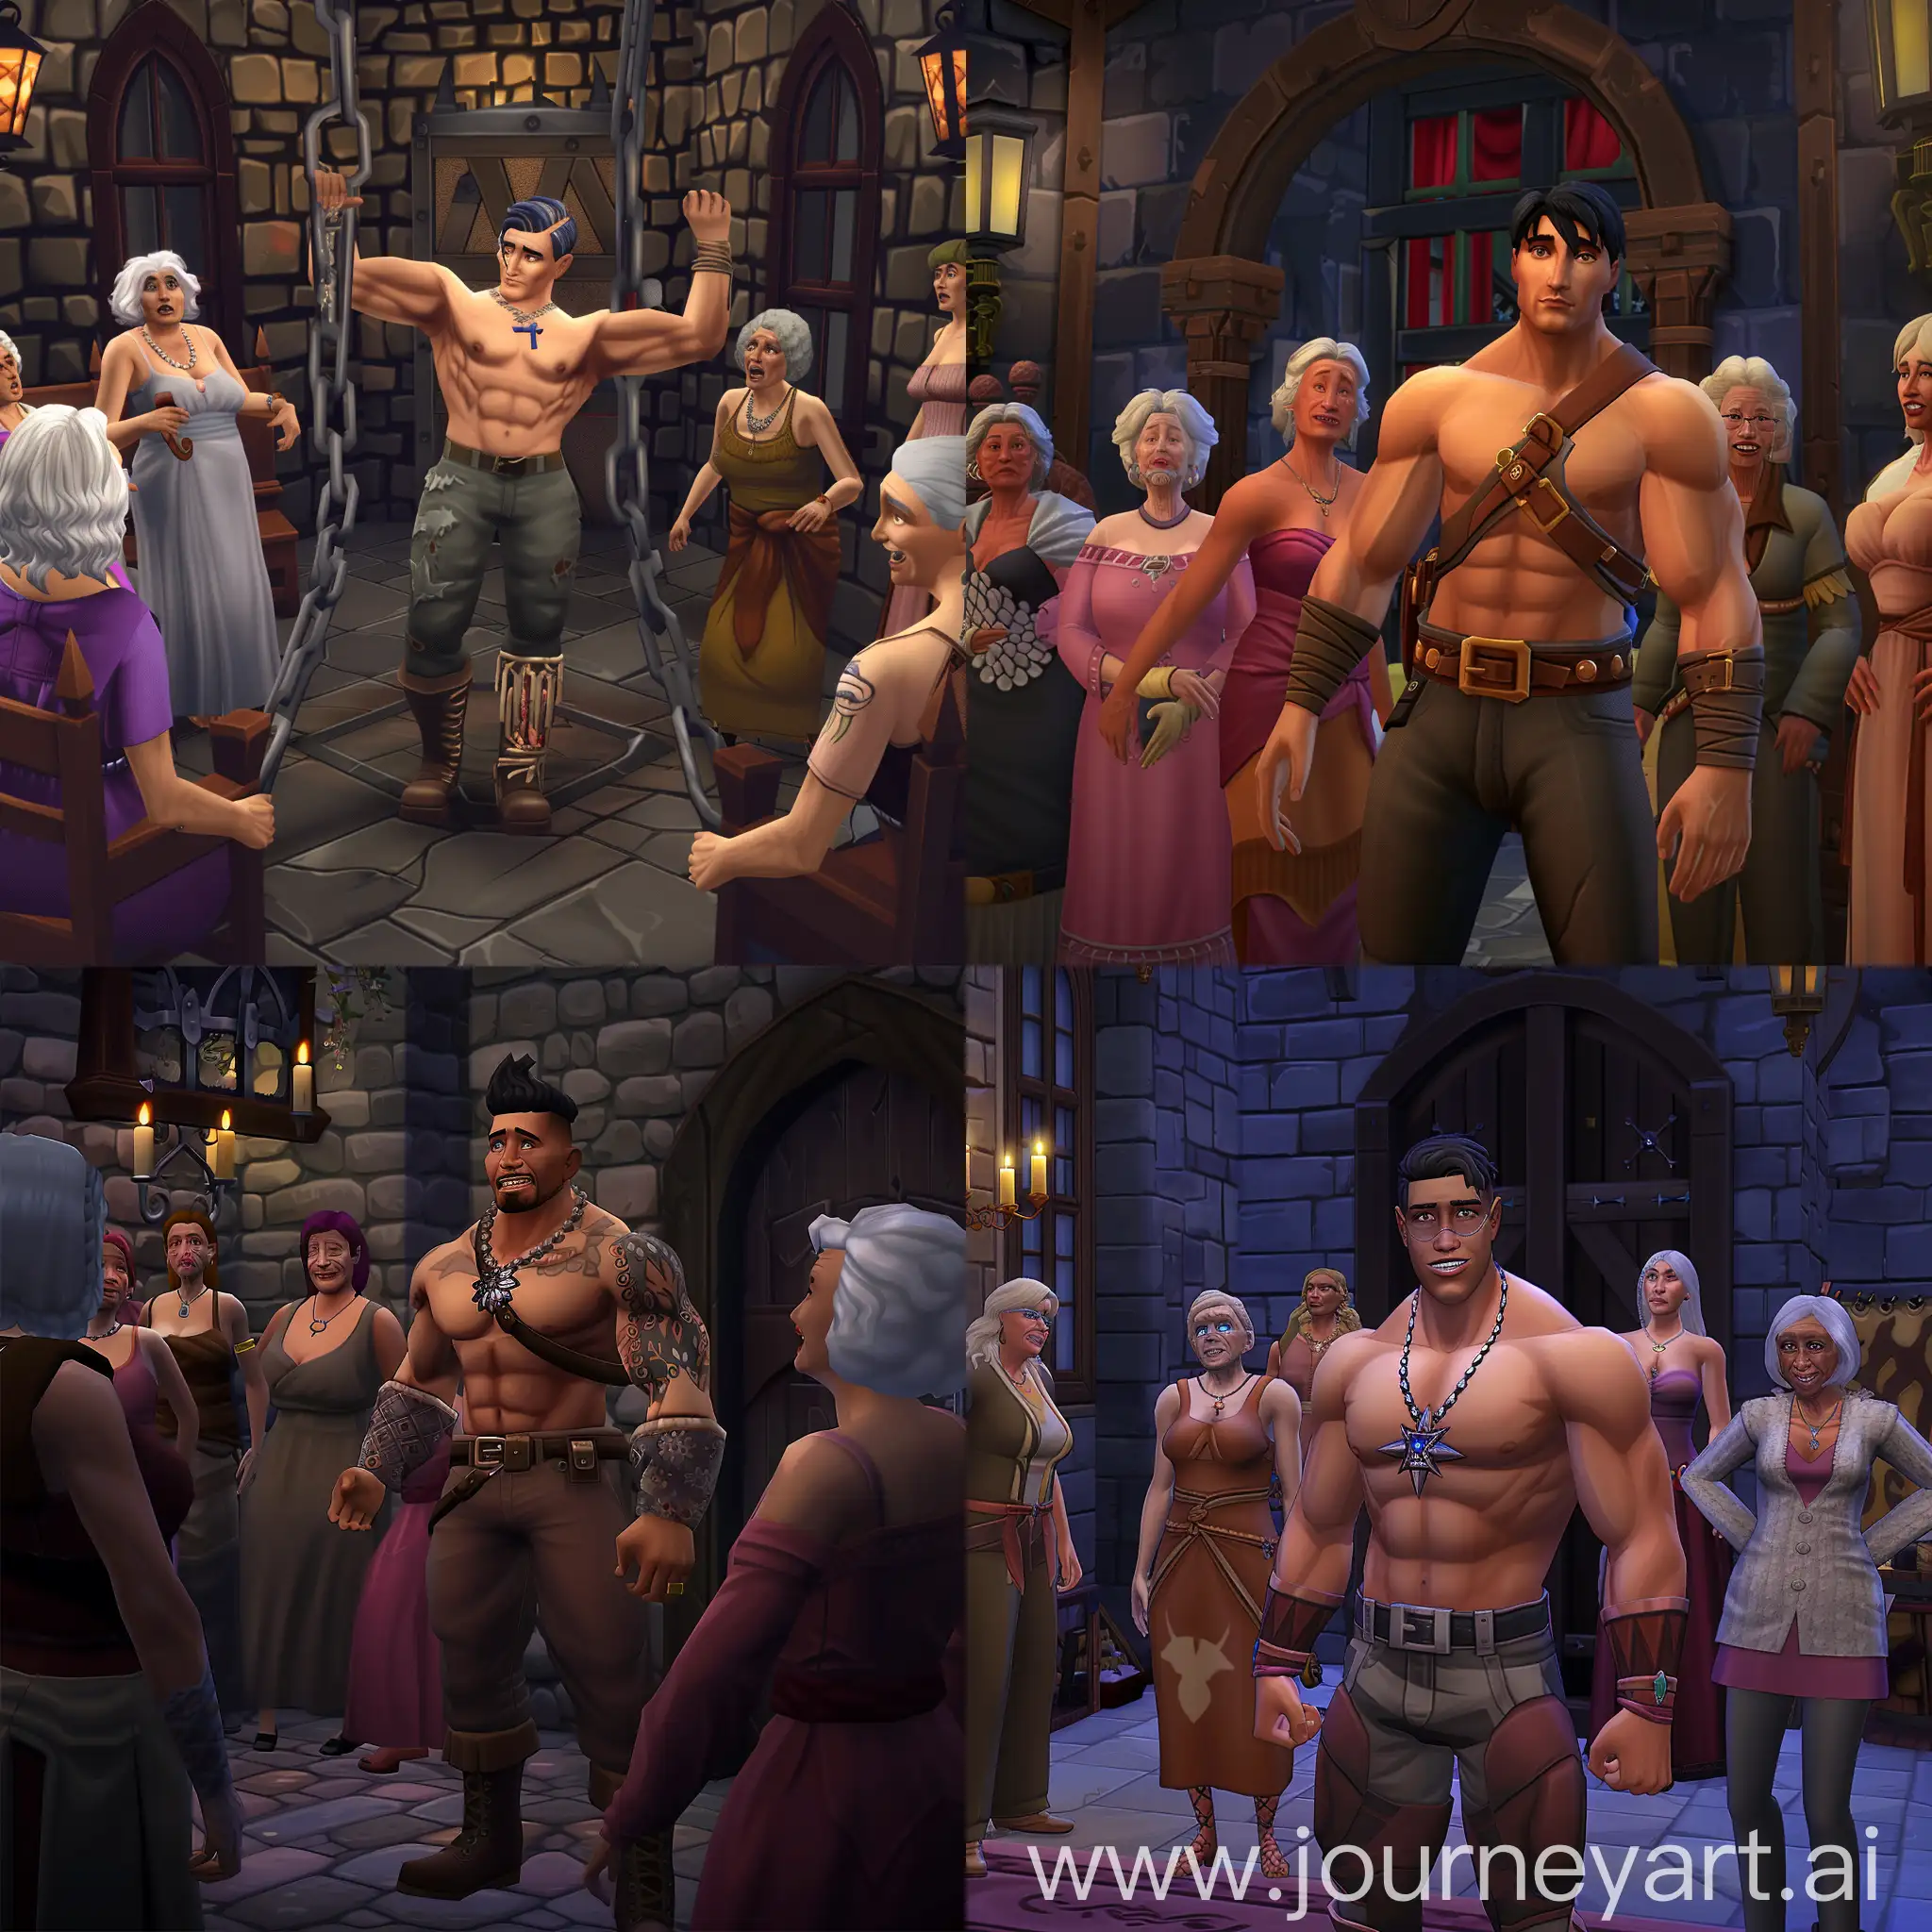 Muscular-Sims-Character-Trapped-in-Dungeon-with-Older-Women